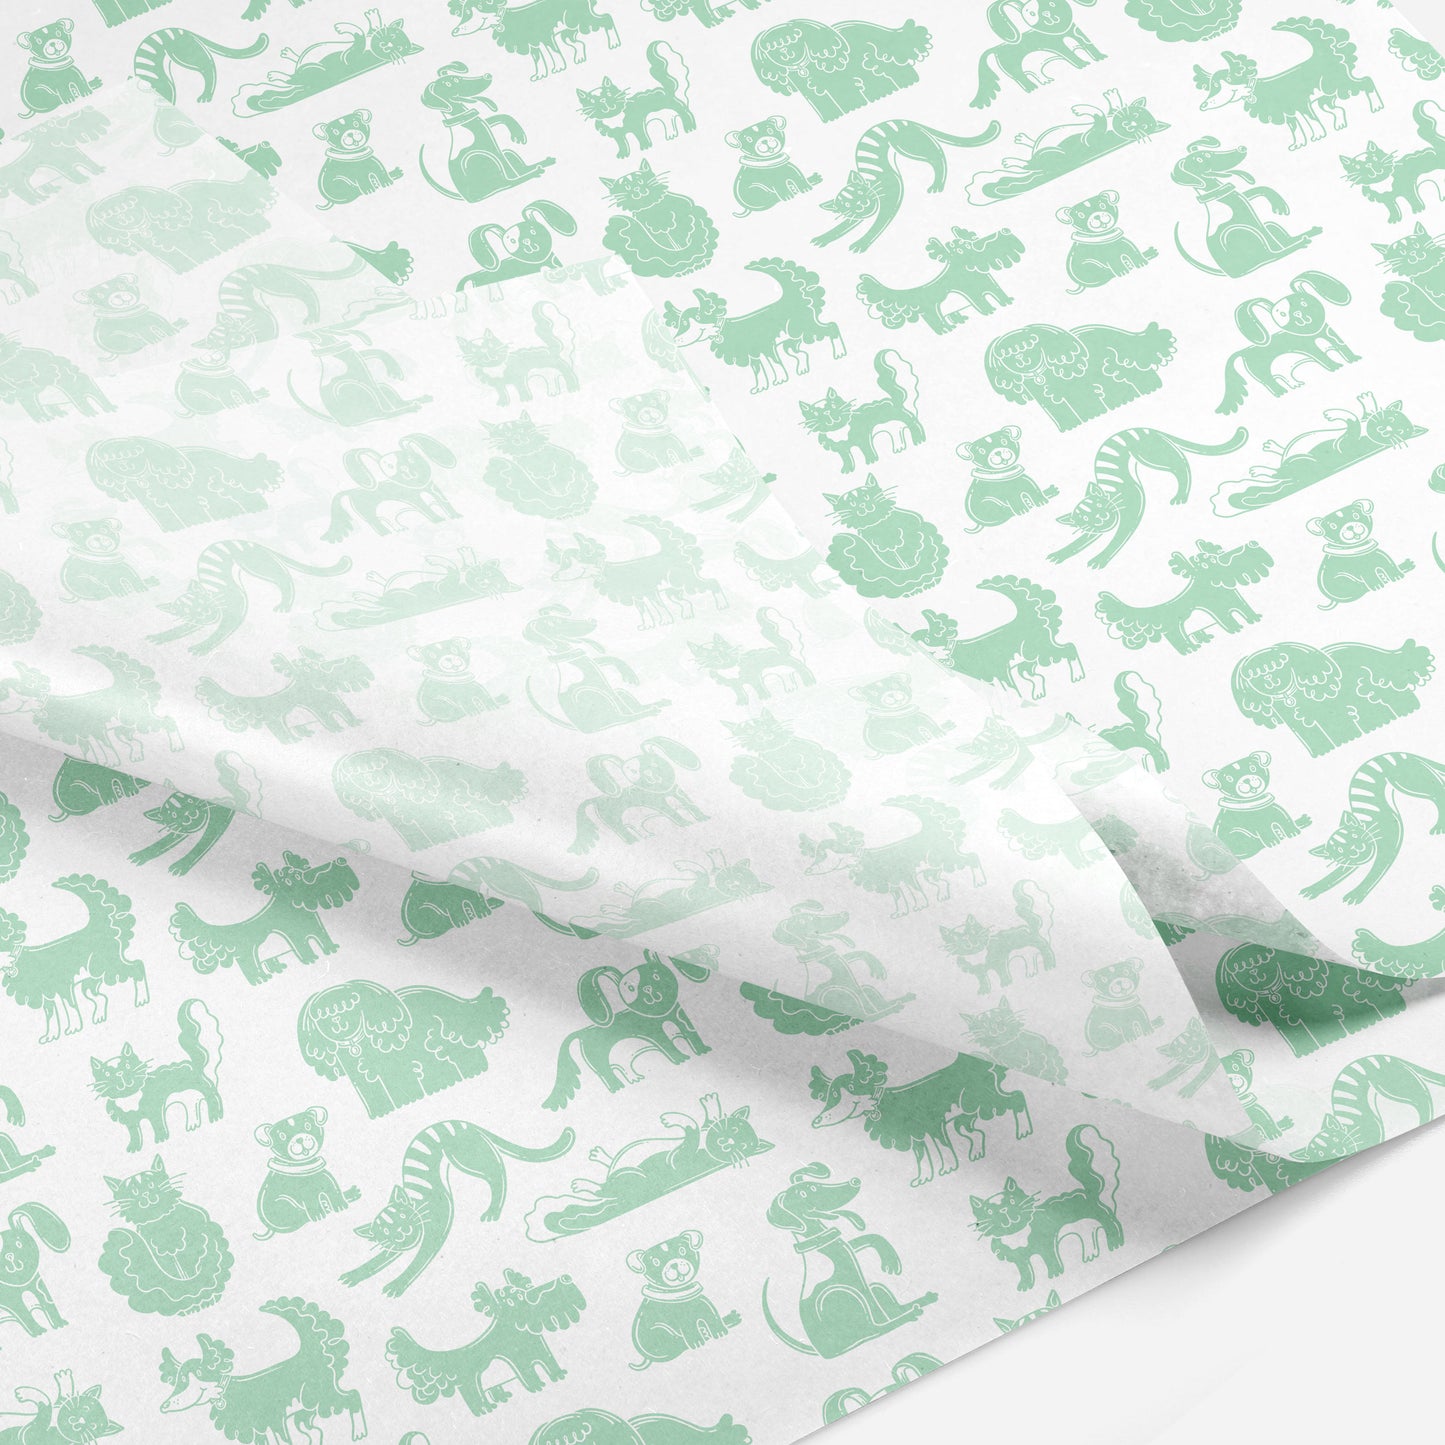 "Cats and Dogs" Tissue Paper